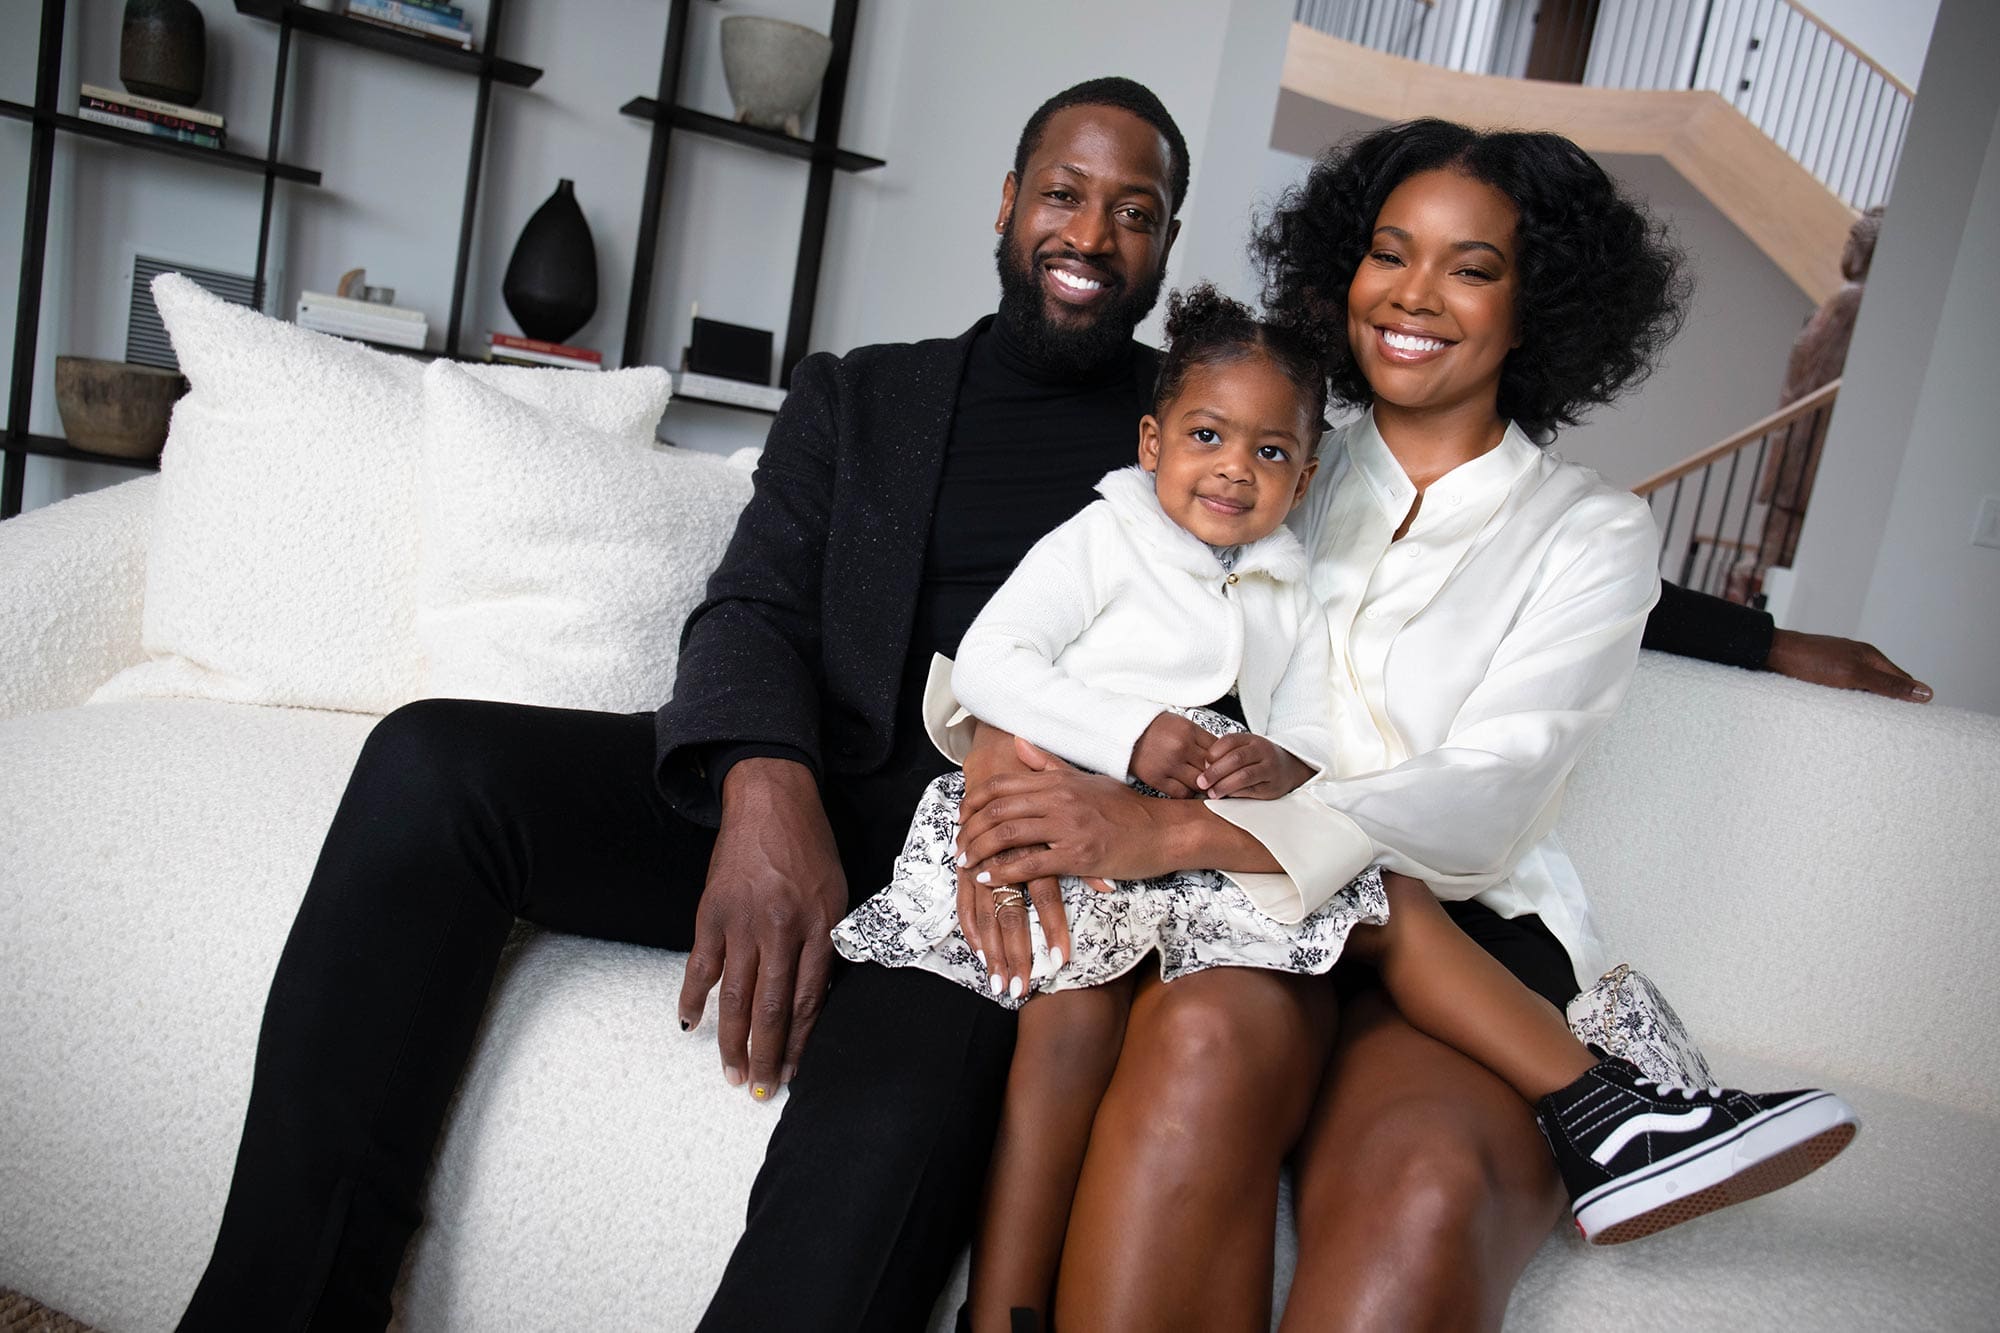 Gabrielle Union Celebrates Father's Day With This Impressive Video